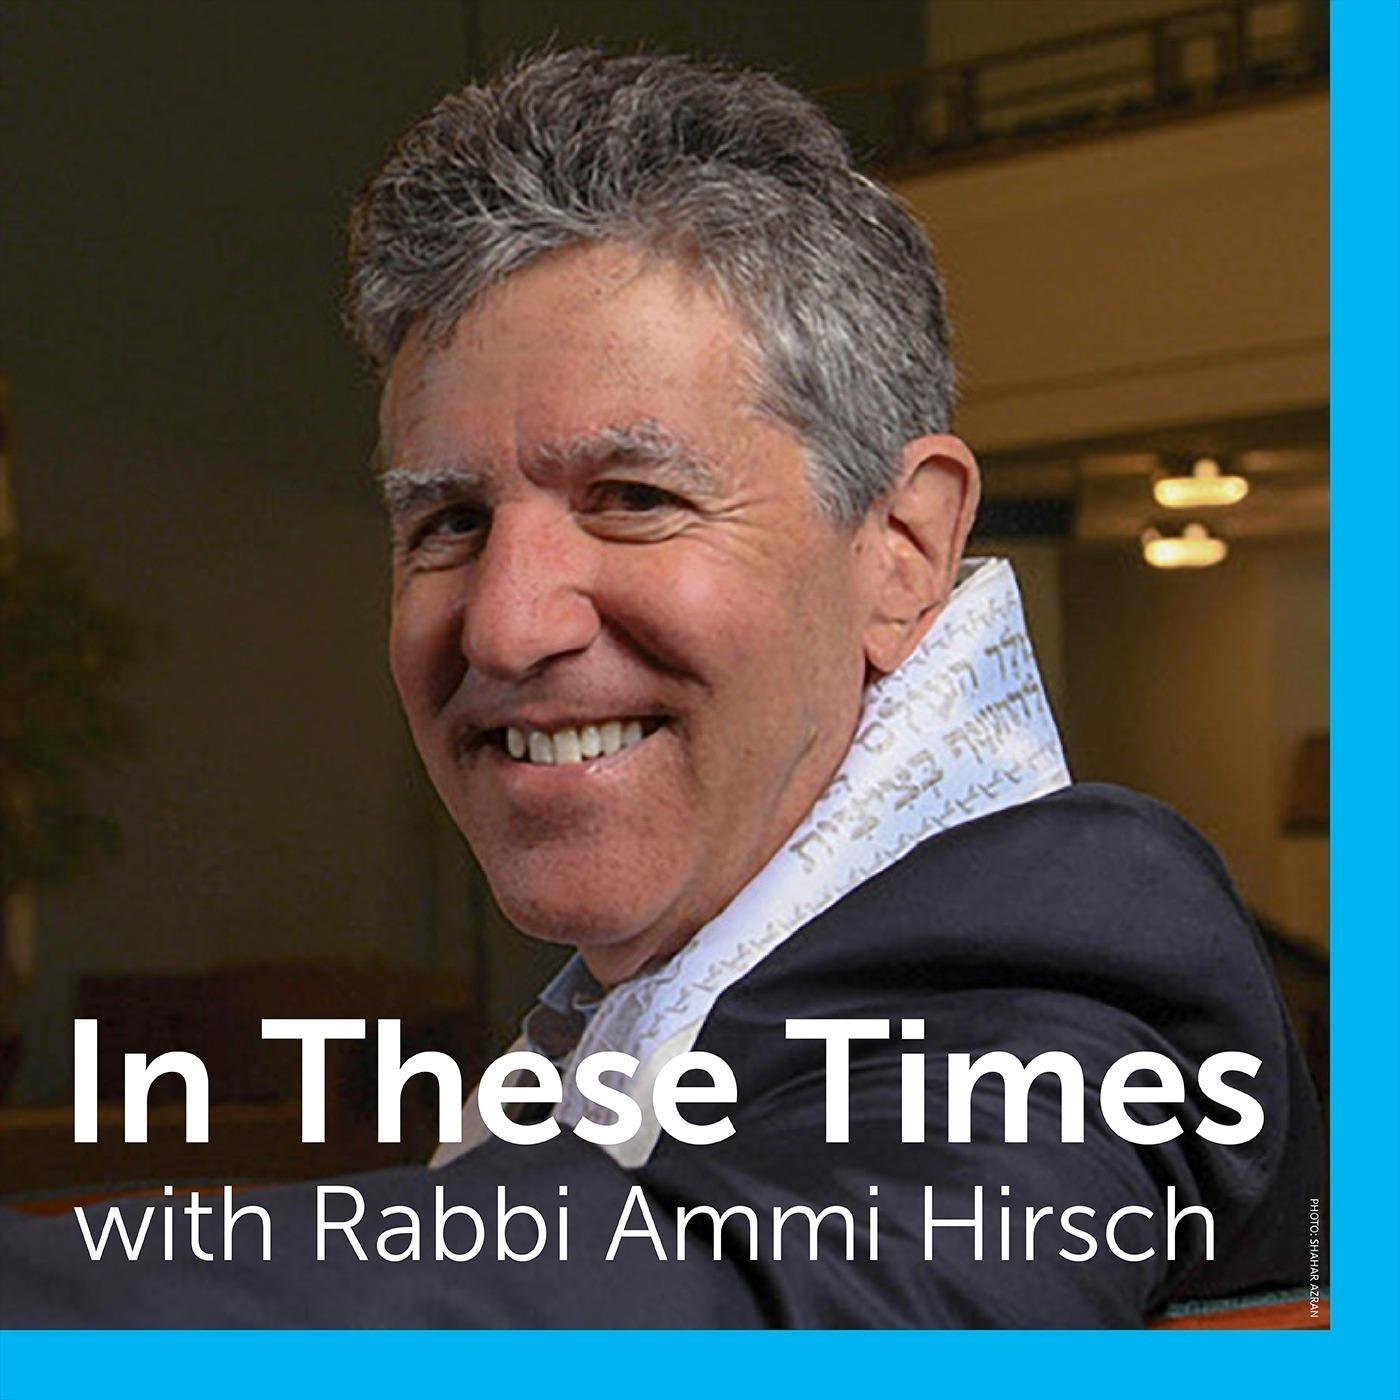 In These Times with Rabbi Ammi Hirsch